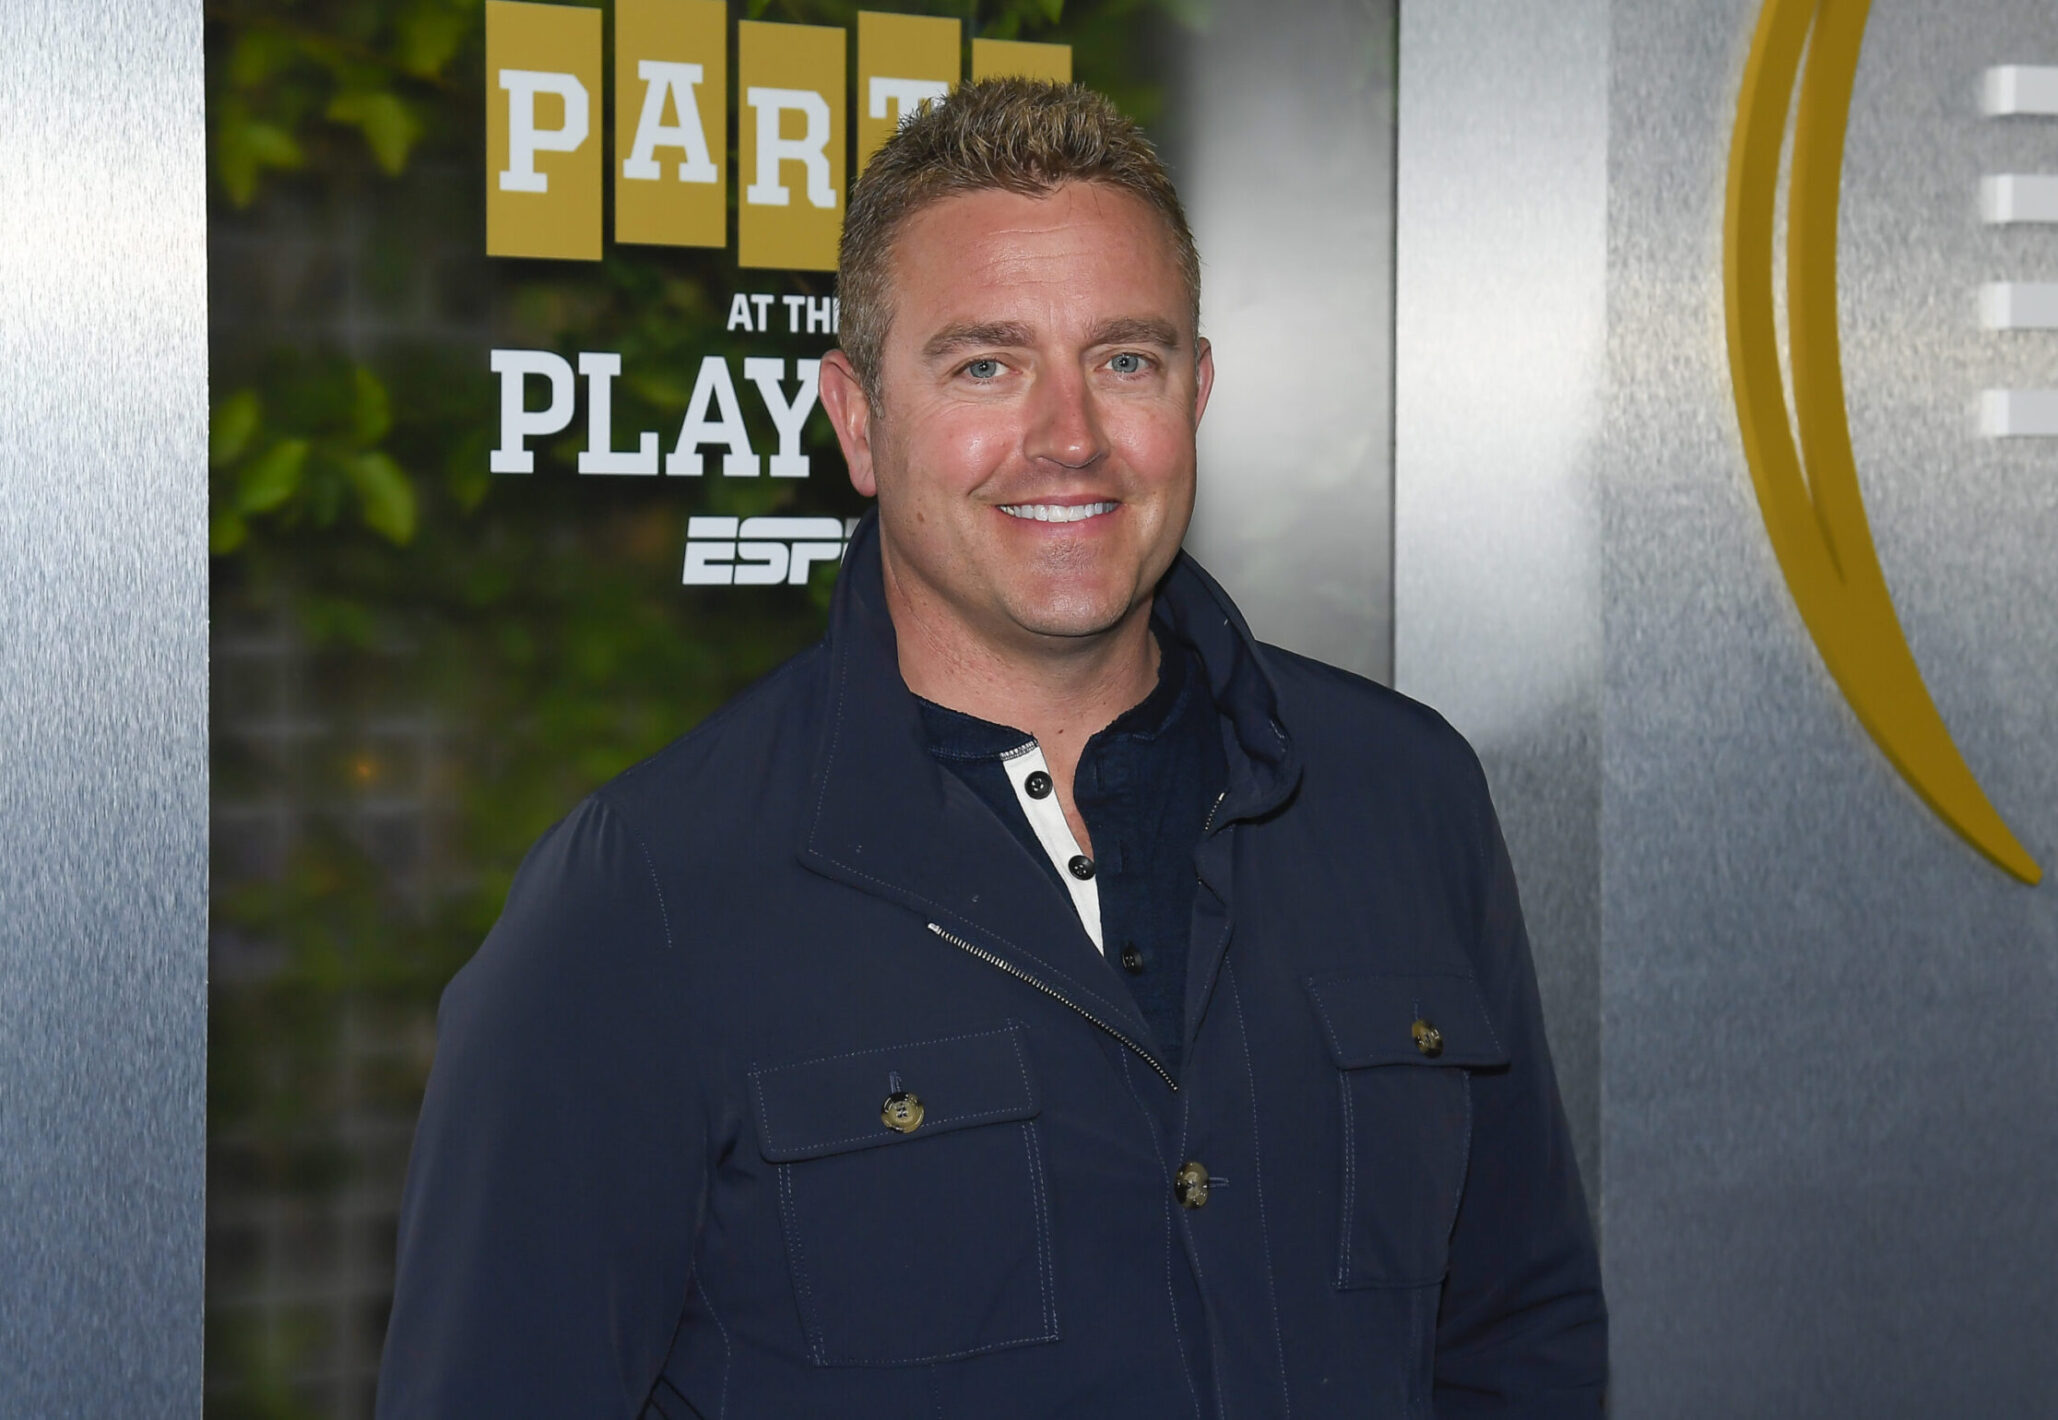 ESPN's Herbstreit Signs Deal to Work NFL Games for